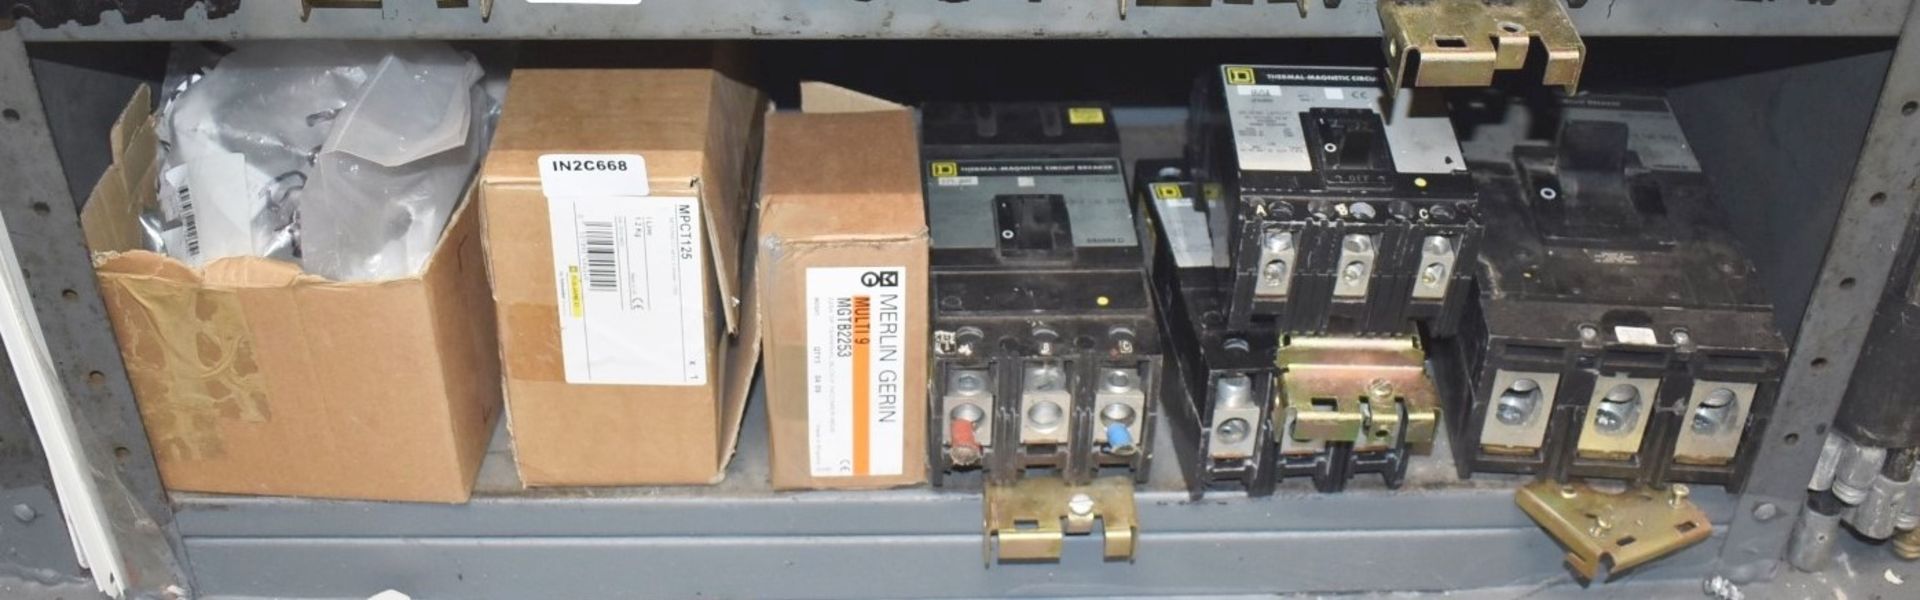 Assorted Electrical Components - Mainly Circuit Breakers - Contents of Shelf - Ref: C668 - CL816 - L